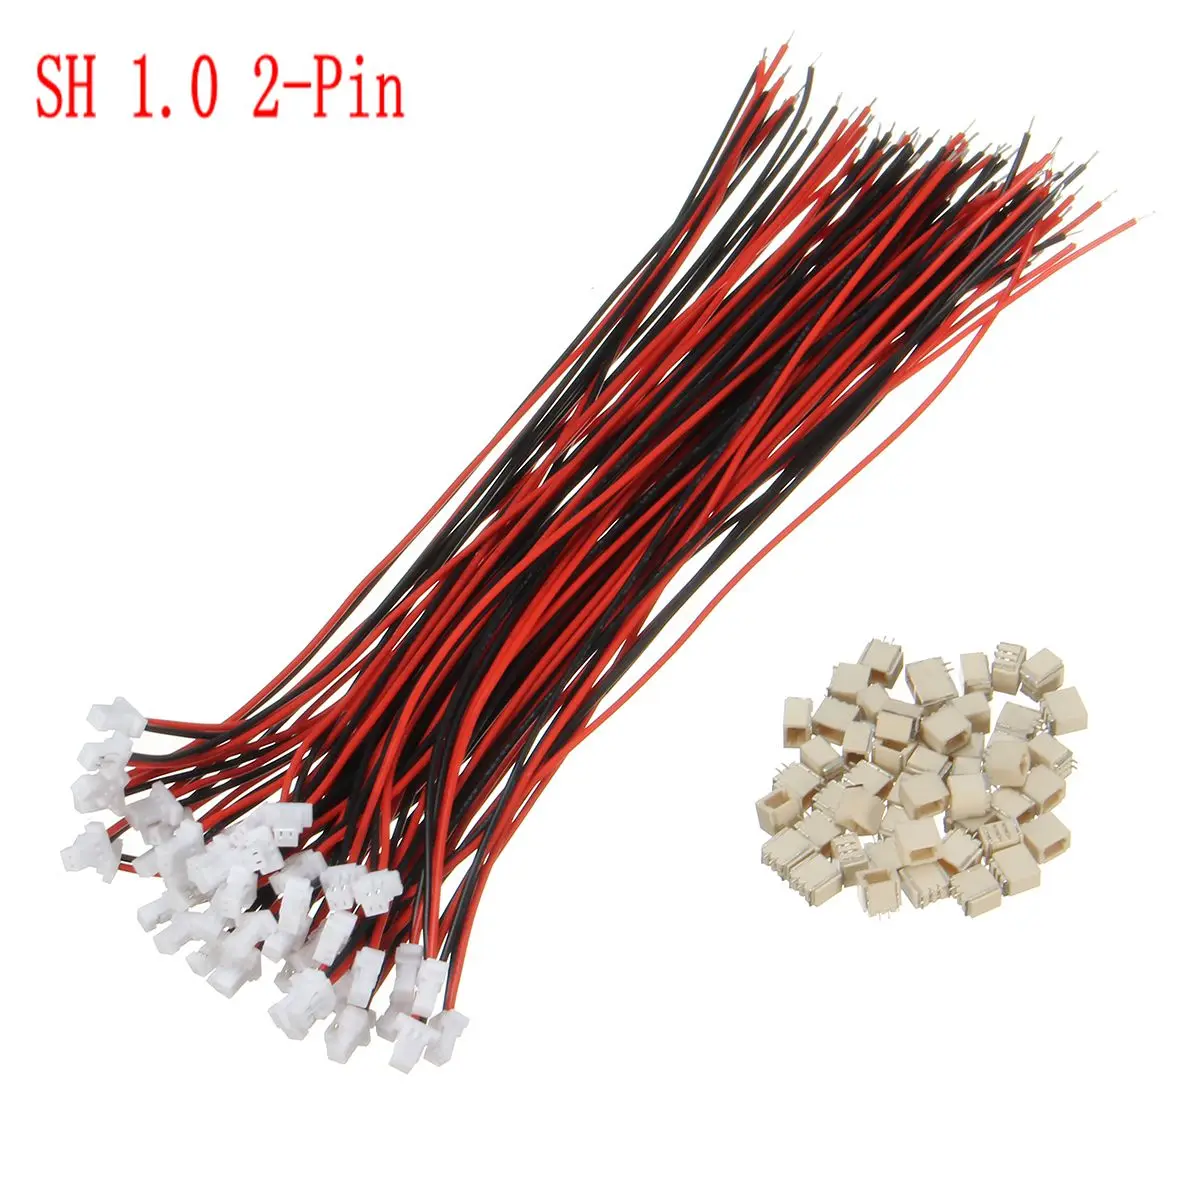 

50pcs Mini Micro JST 1.0 SH 2-Pin Connector Plug With Wires Cables 28AWG 150mm